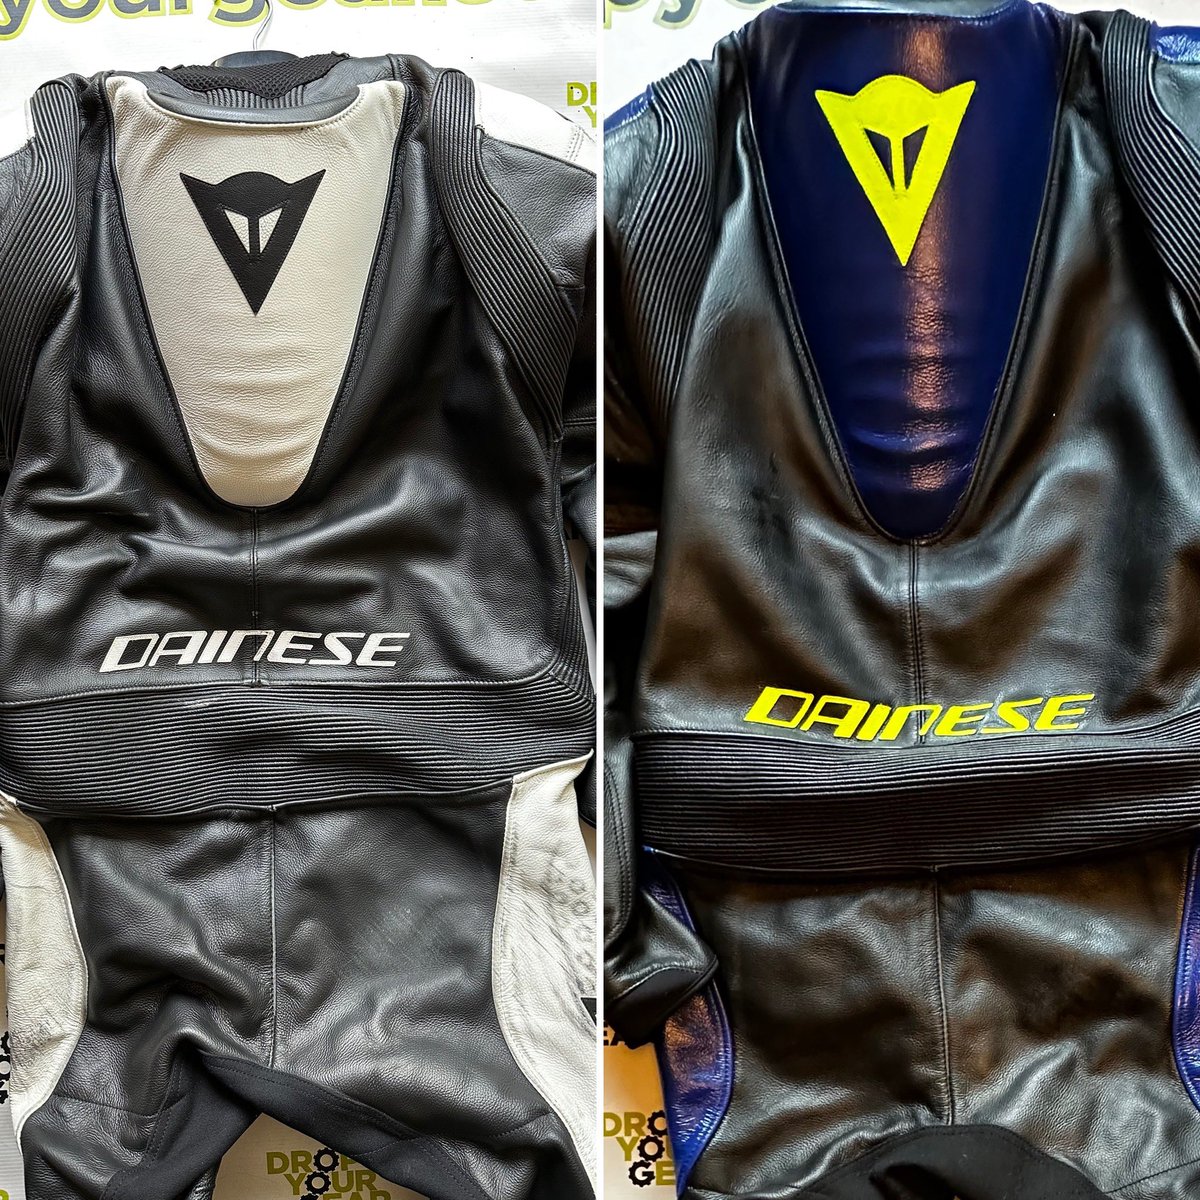 Well, I think this has got to be one of the easiest games of spot the difference out there. This @dainese suit had the works, it had a valet, restore and a very subtle colour change. What do you think?